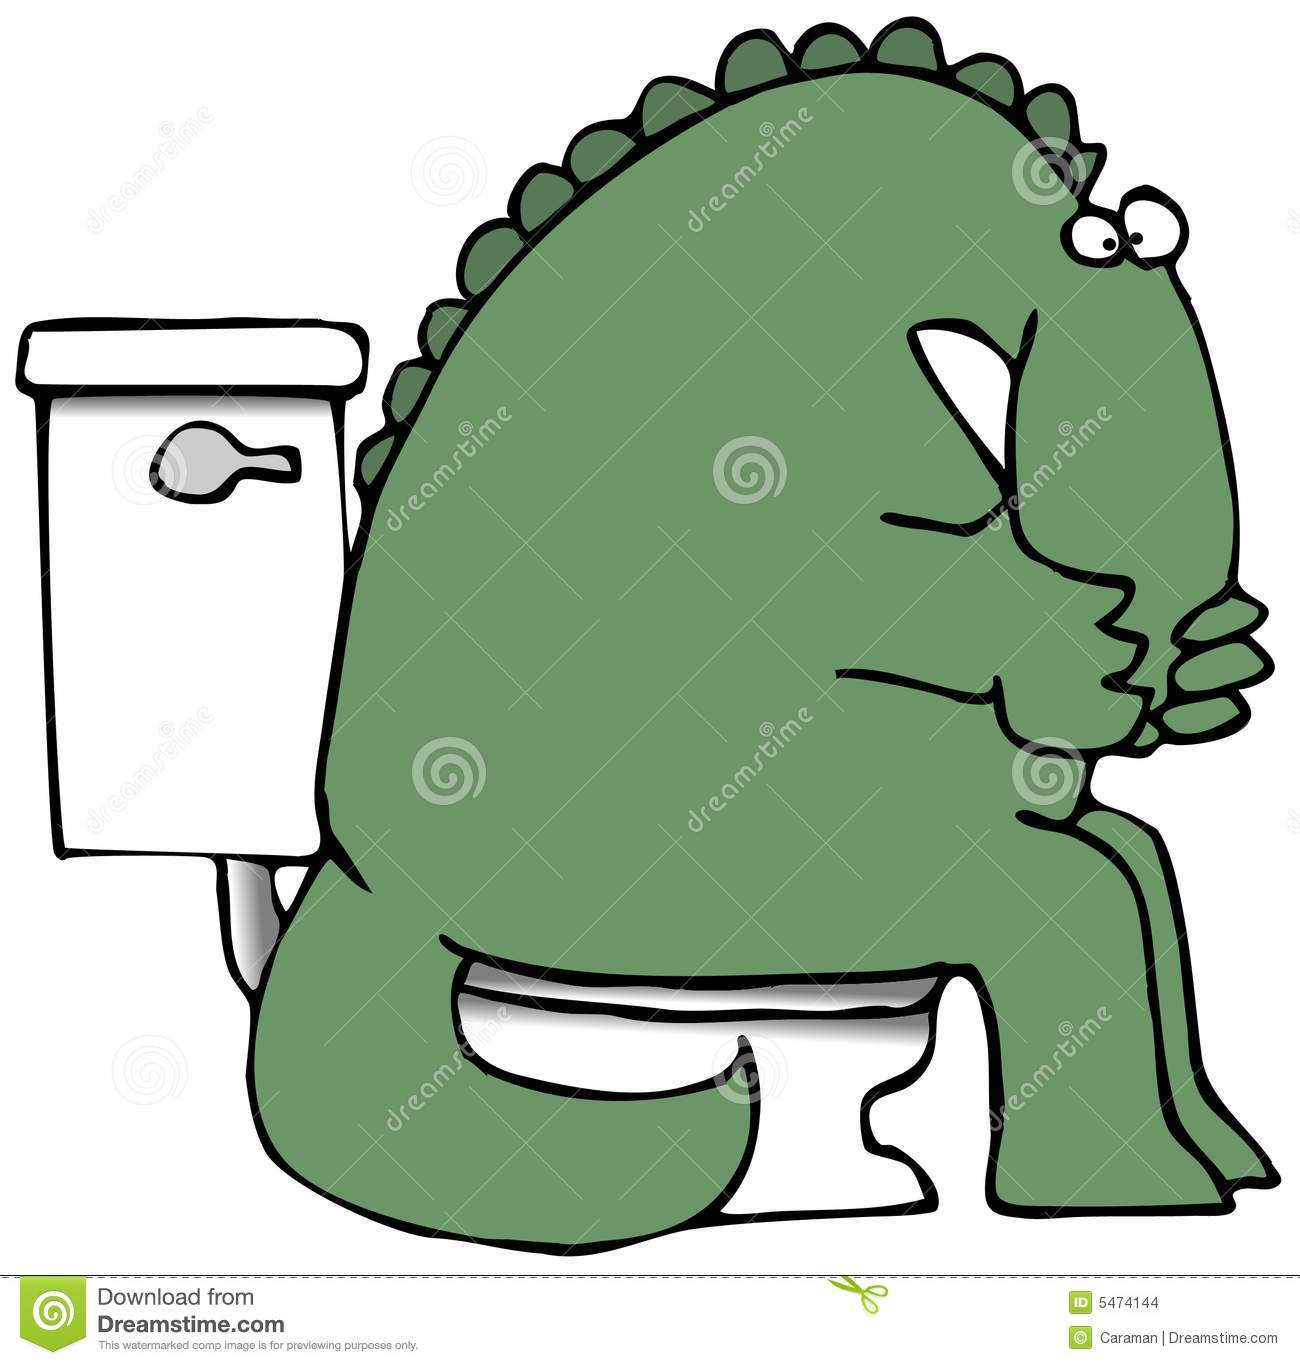 This Illustration Depicts A Dinosaur Sitting On A Toilet And Holding